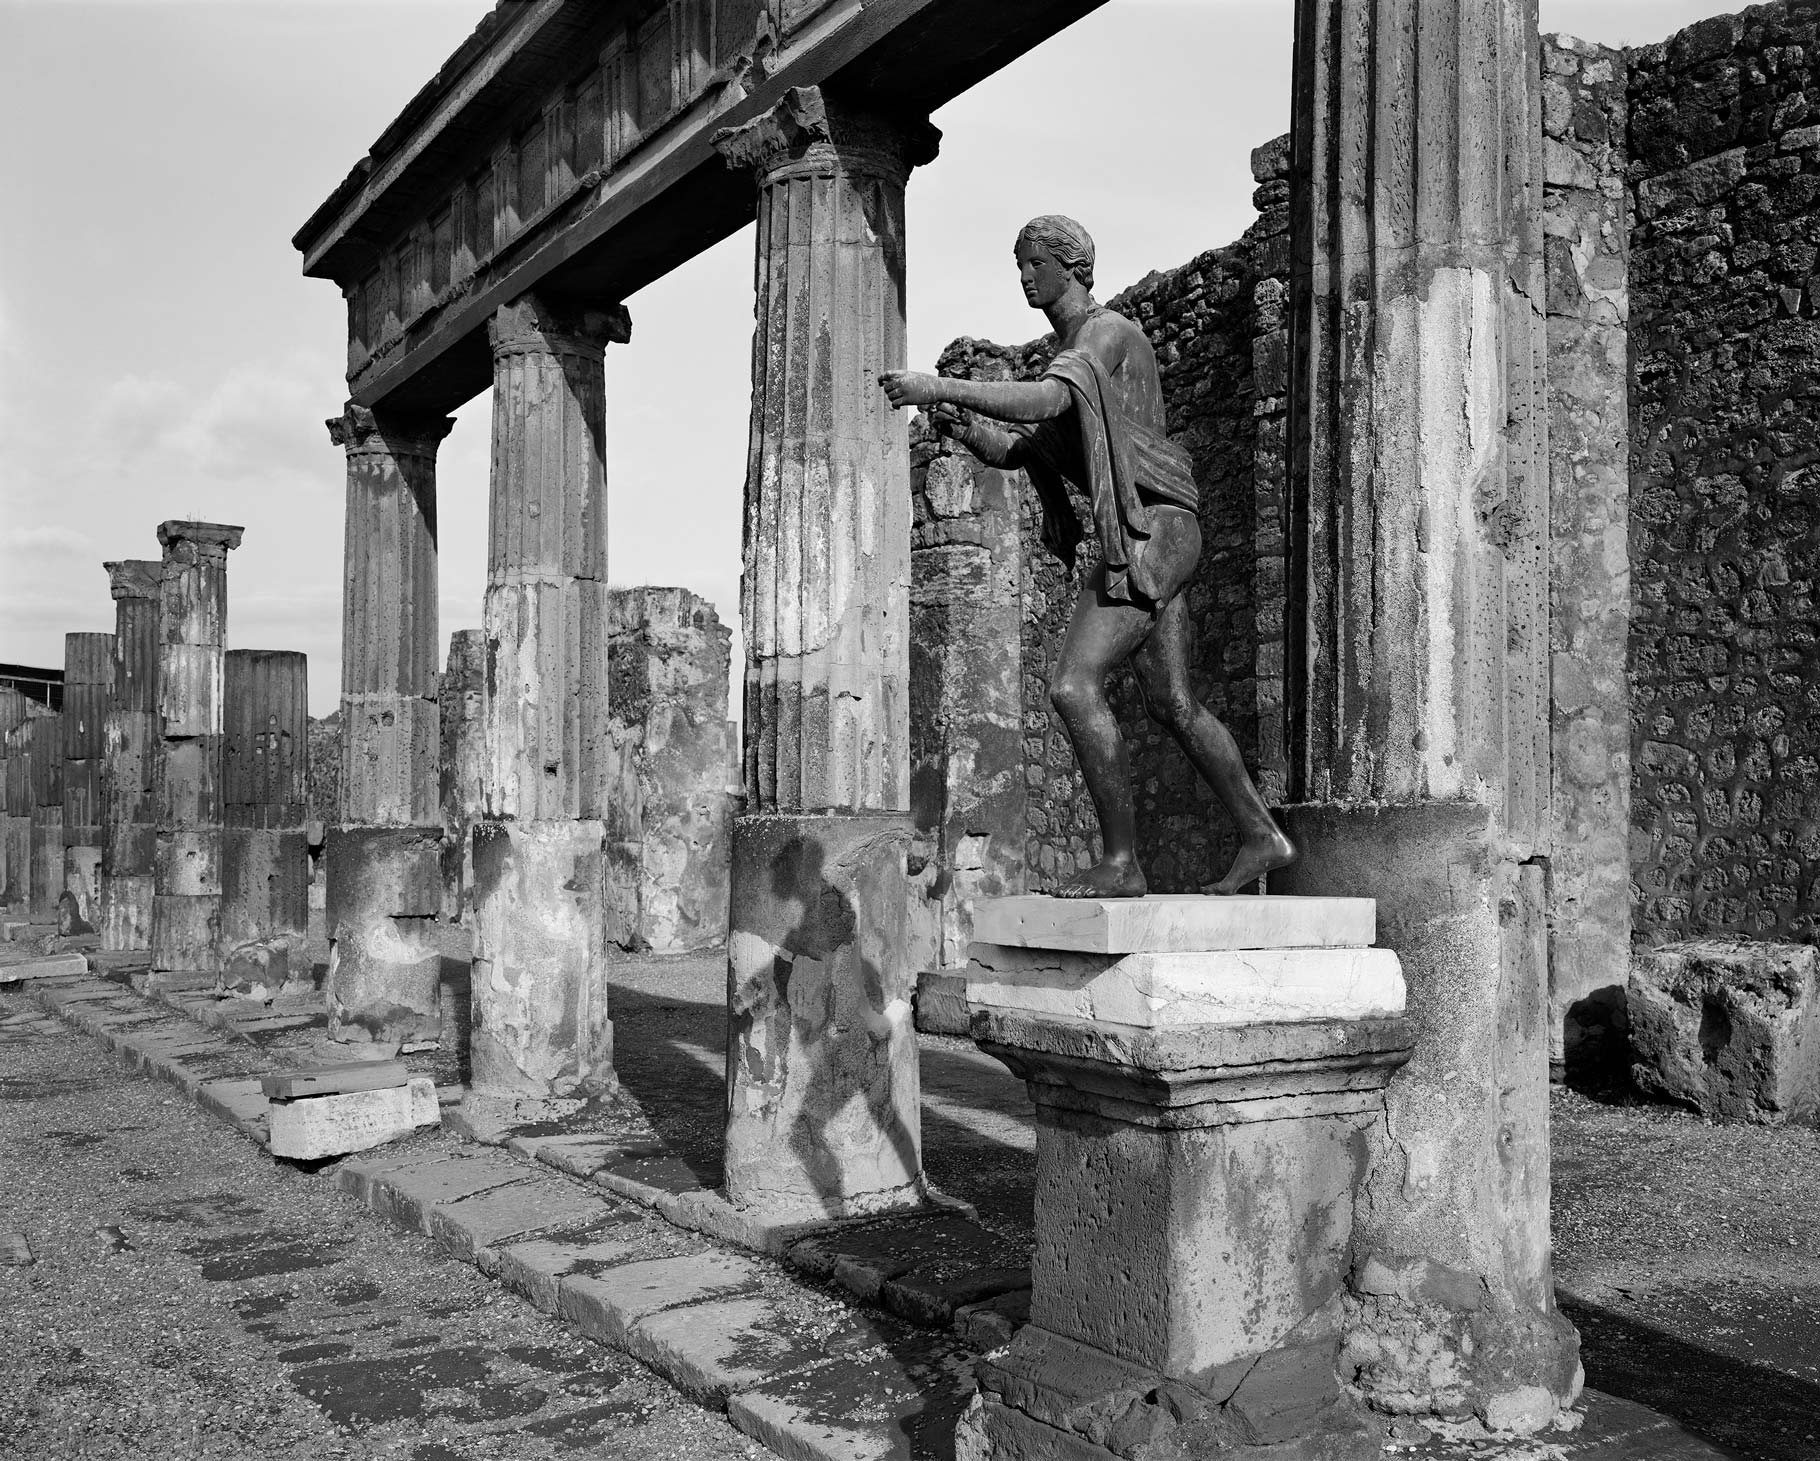 Sculpture on a pedestal outside of a broken building in pompeii, black and white image